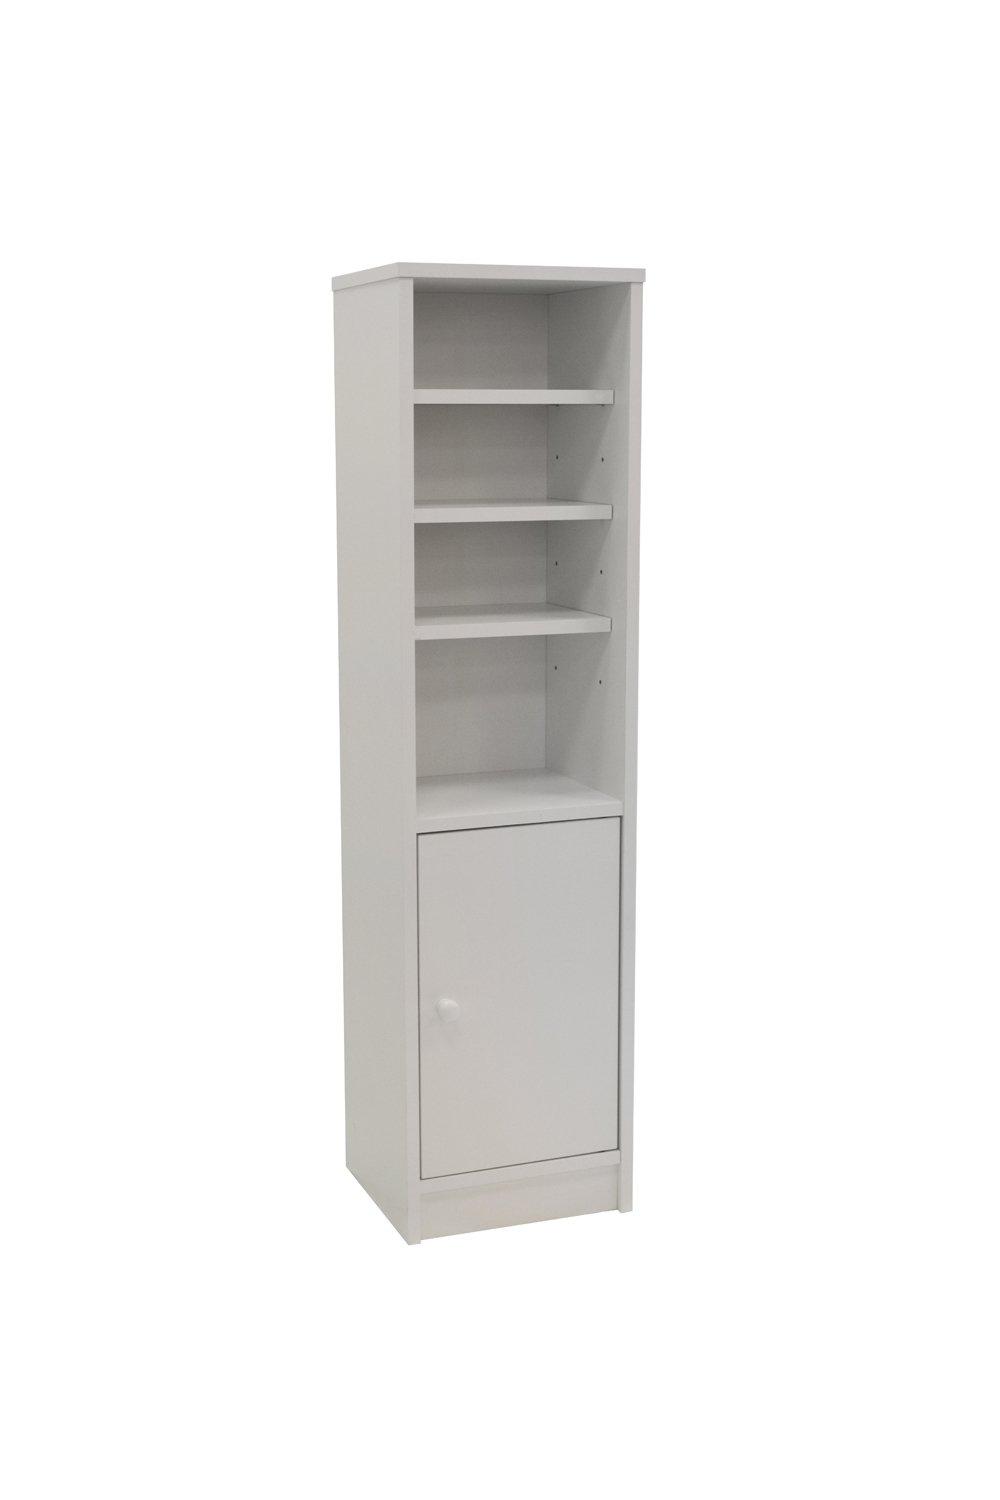 'Jamerson'  Compact Storage Cupboard / Bathroom Cabinet With Shelves  White